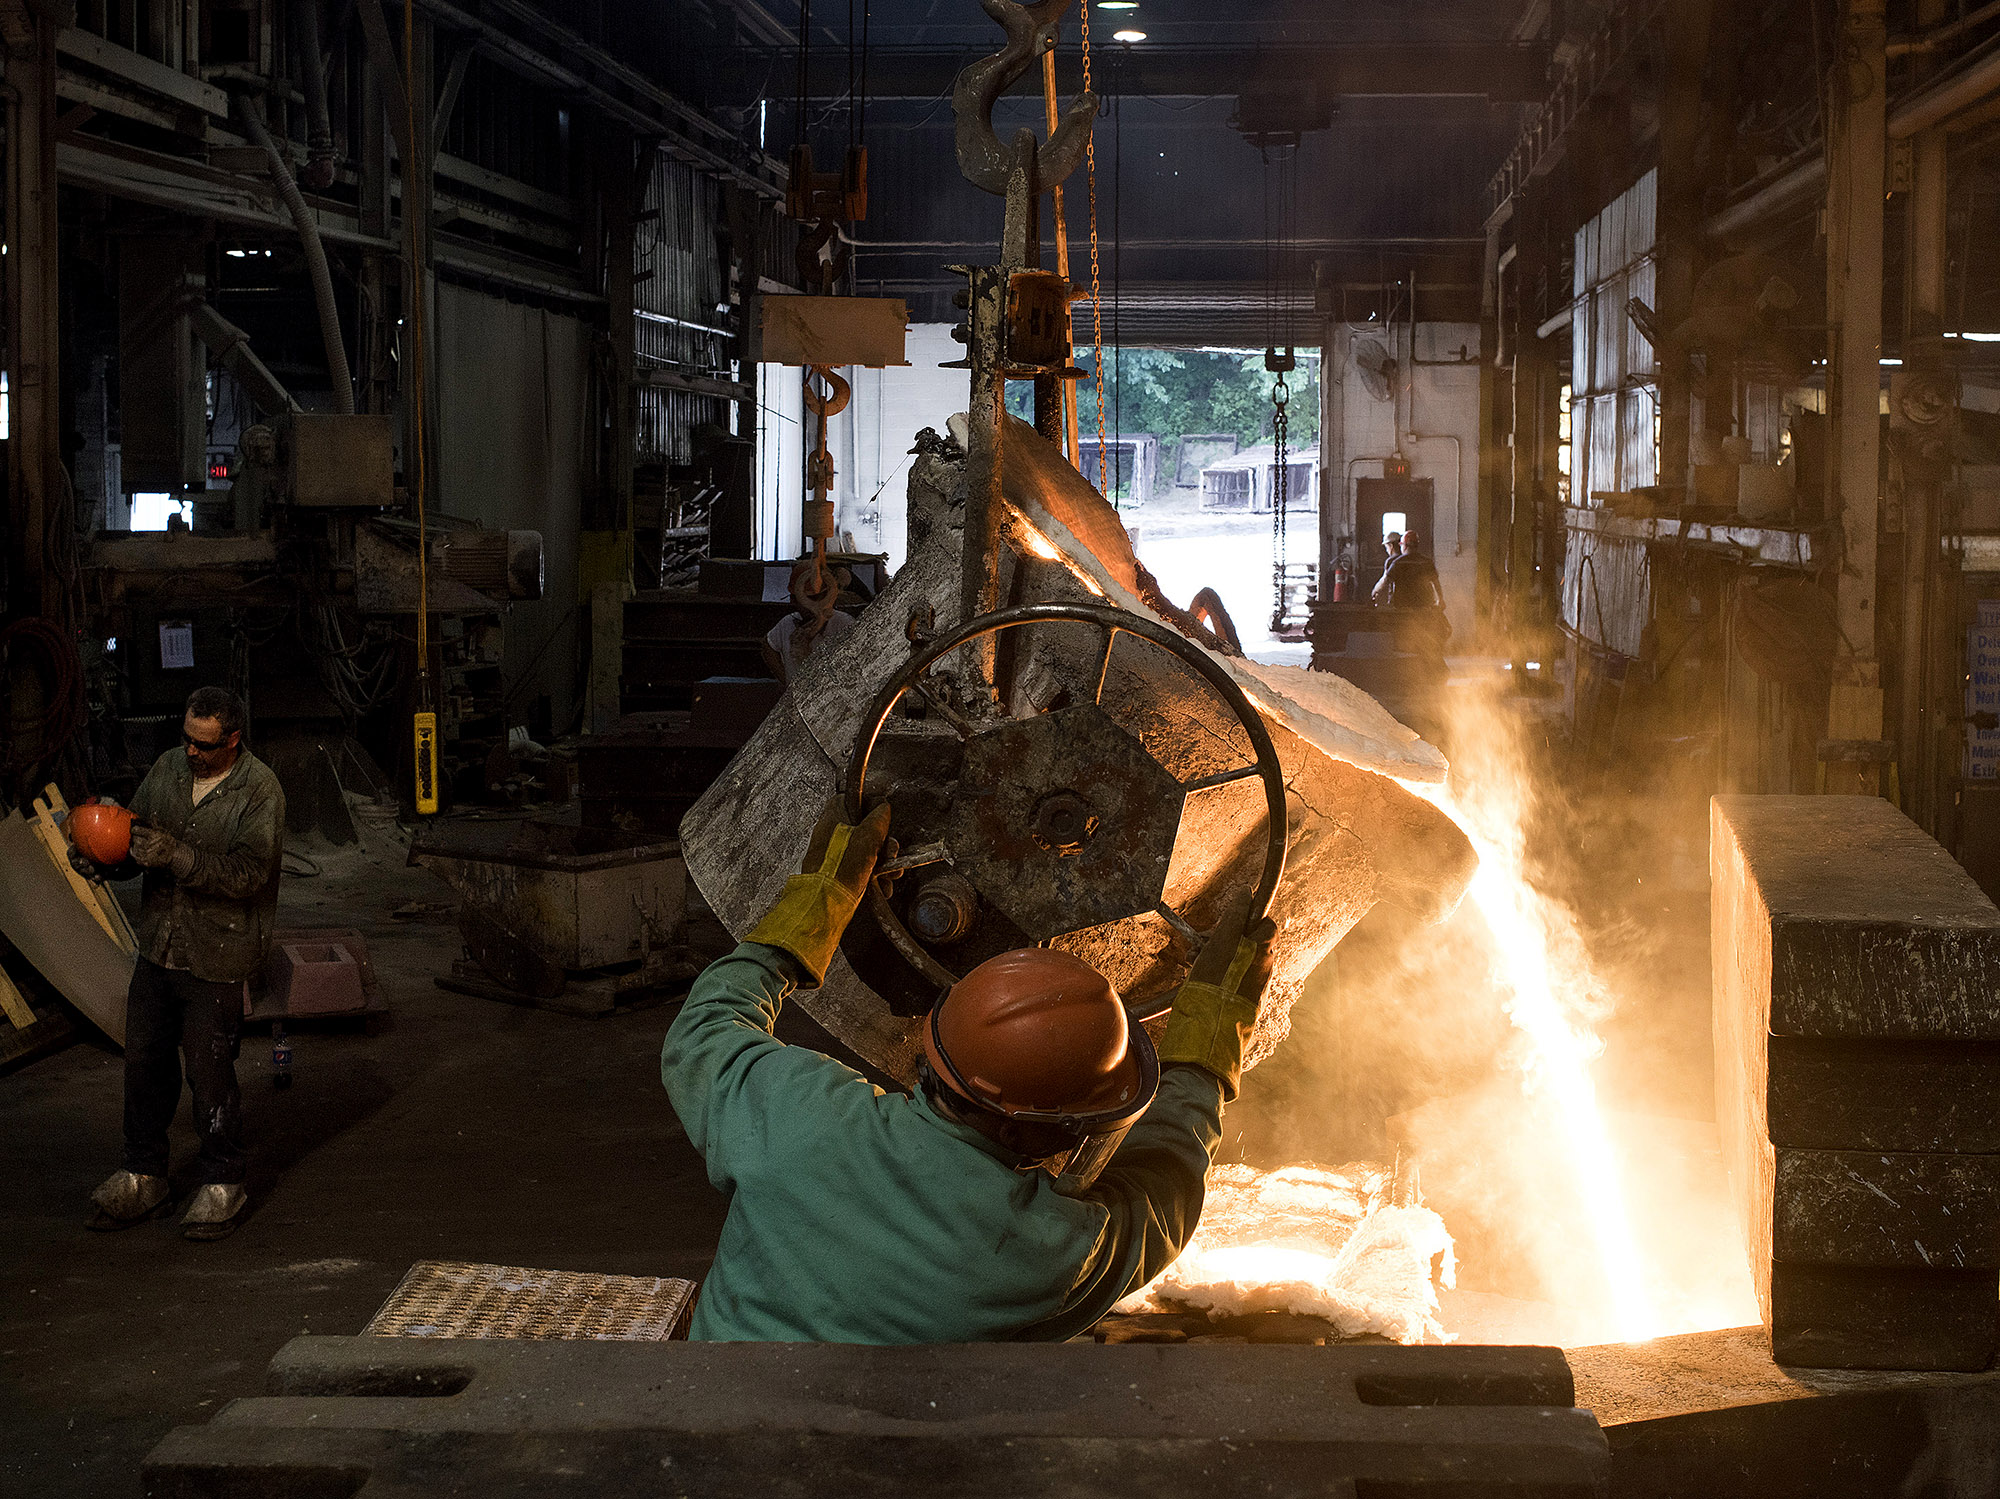 Molten steel is poured into a large mold at a castings facility in Salem, Ohio.